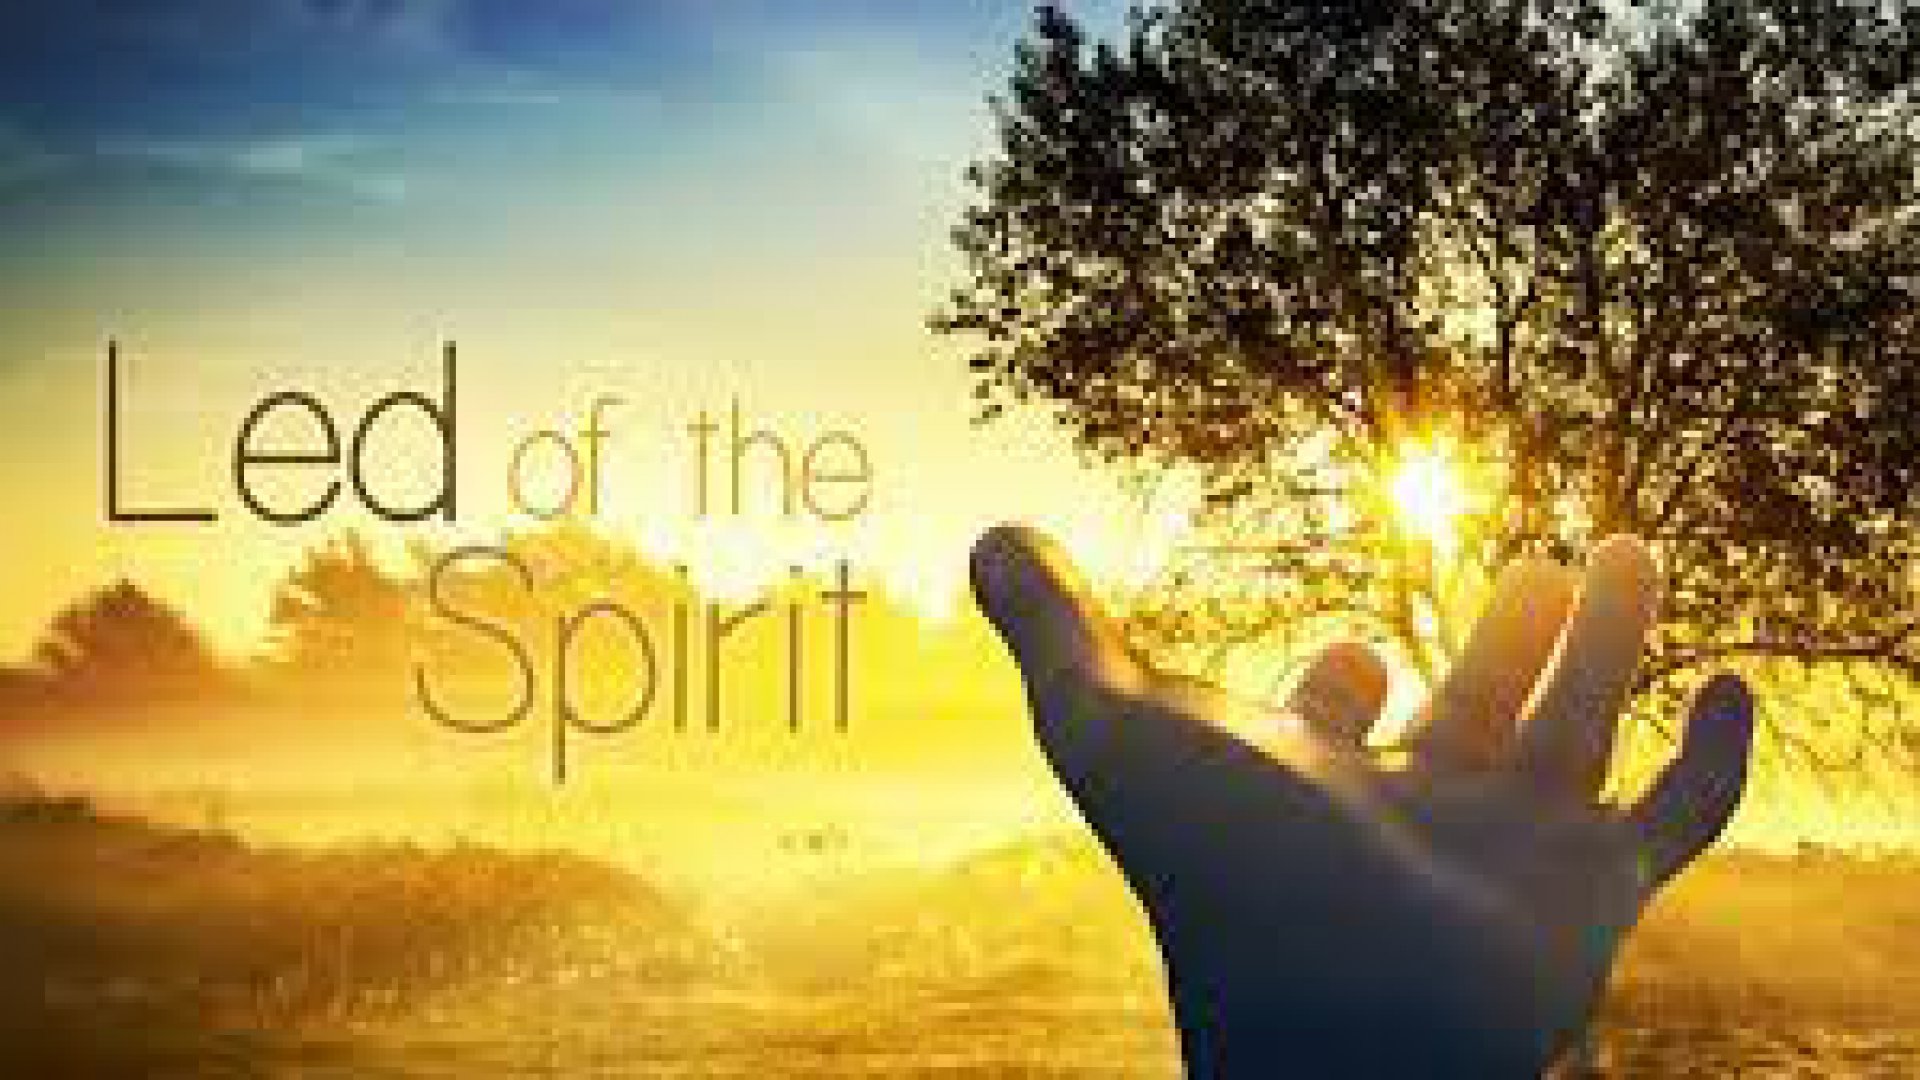 LED BY THE SPIRIT